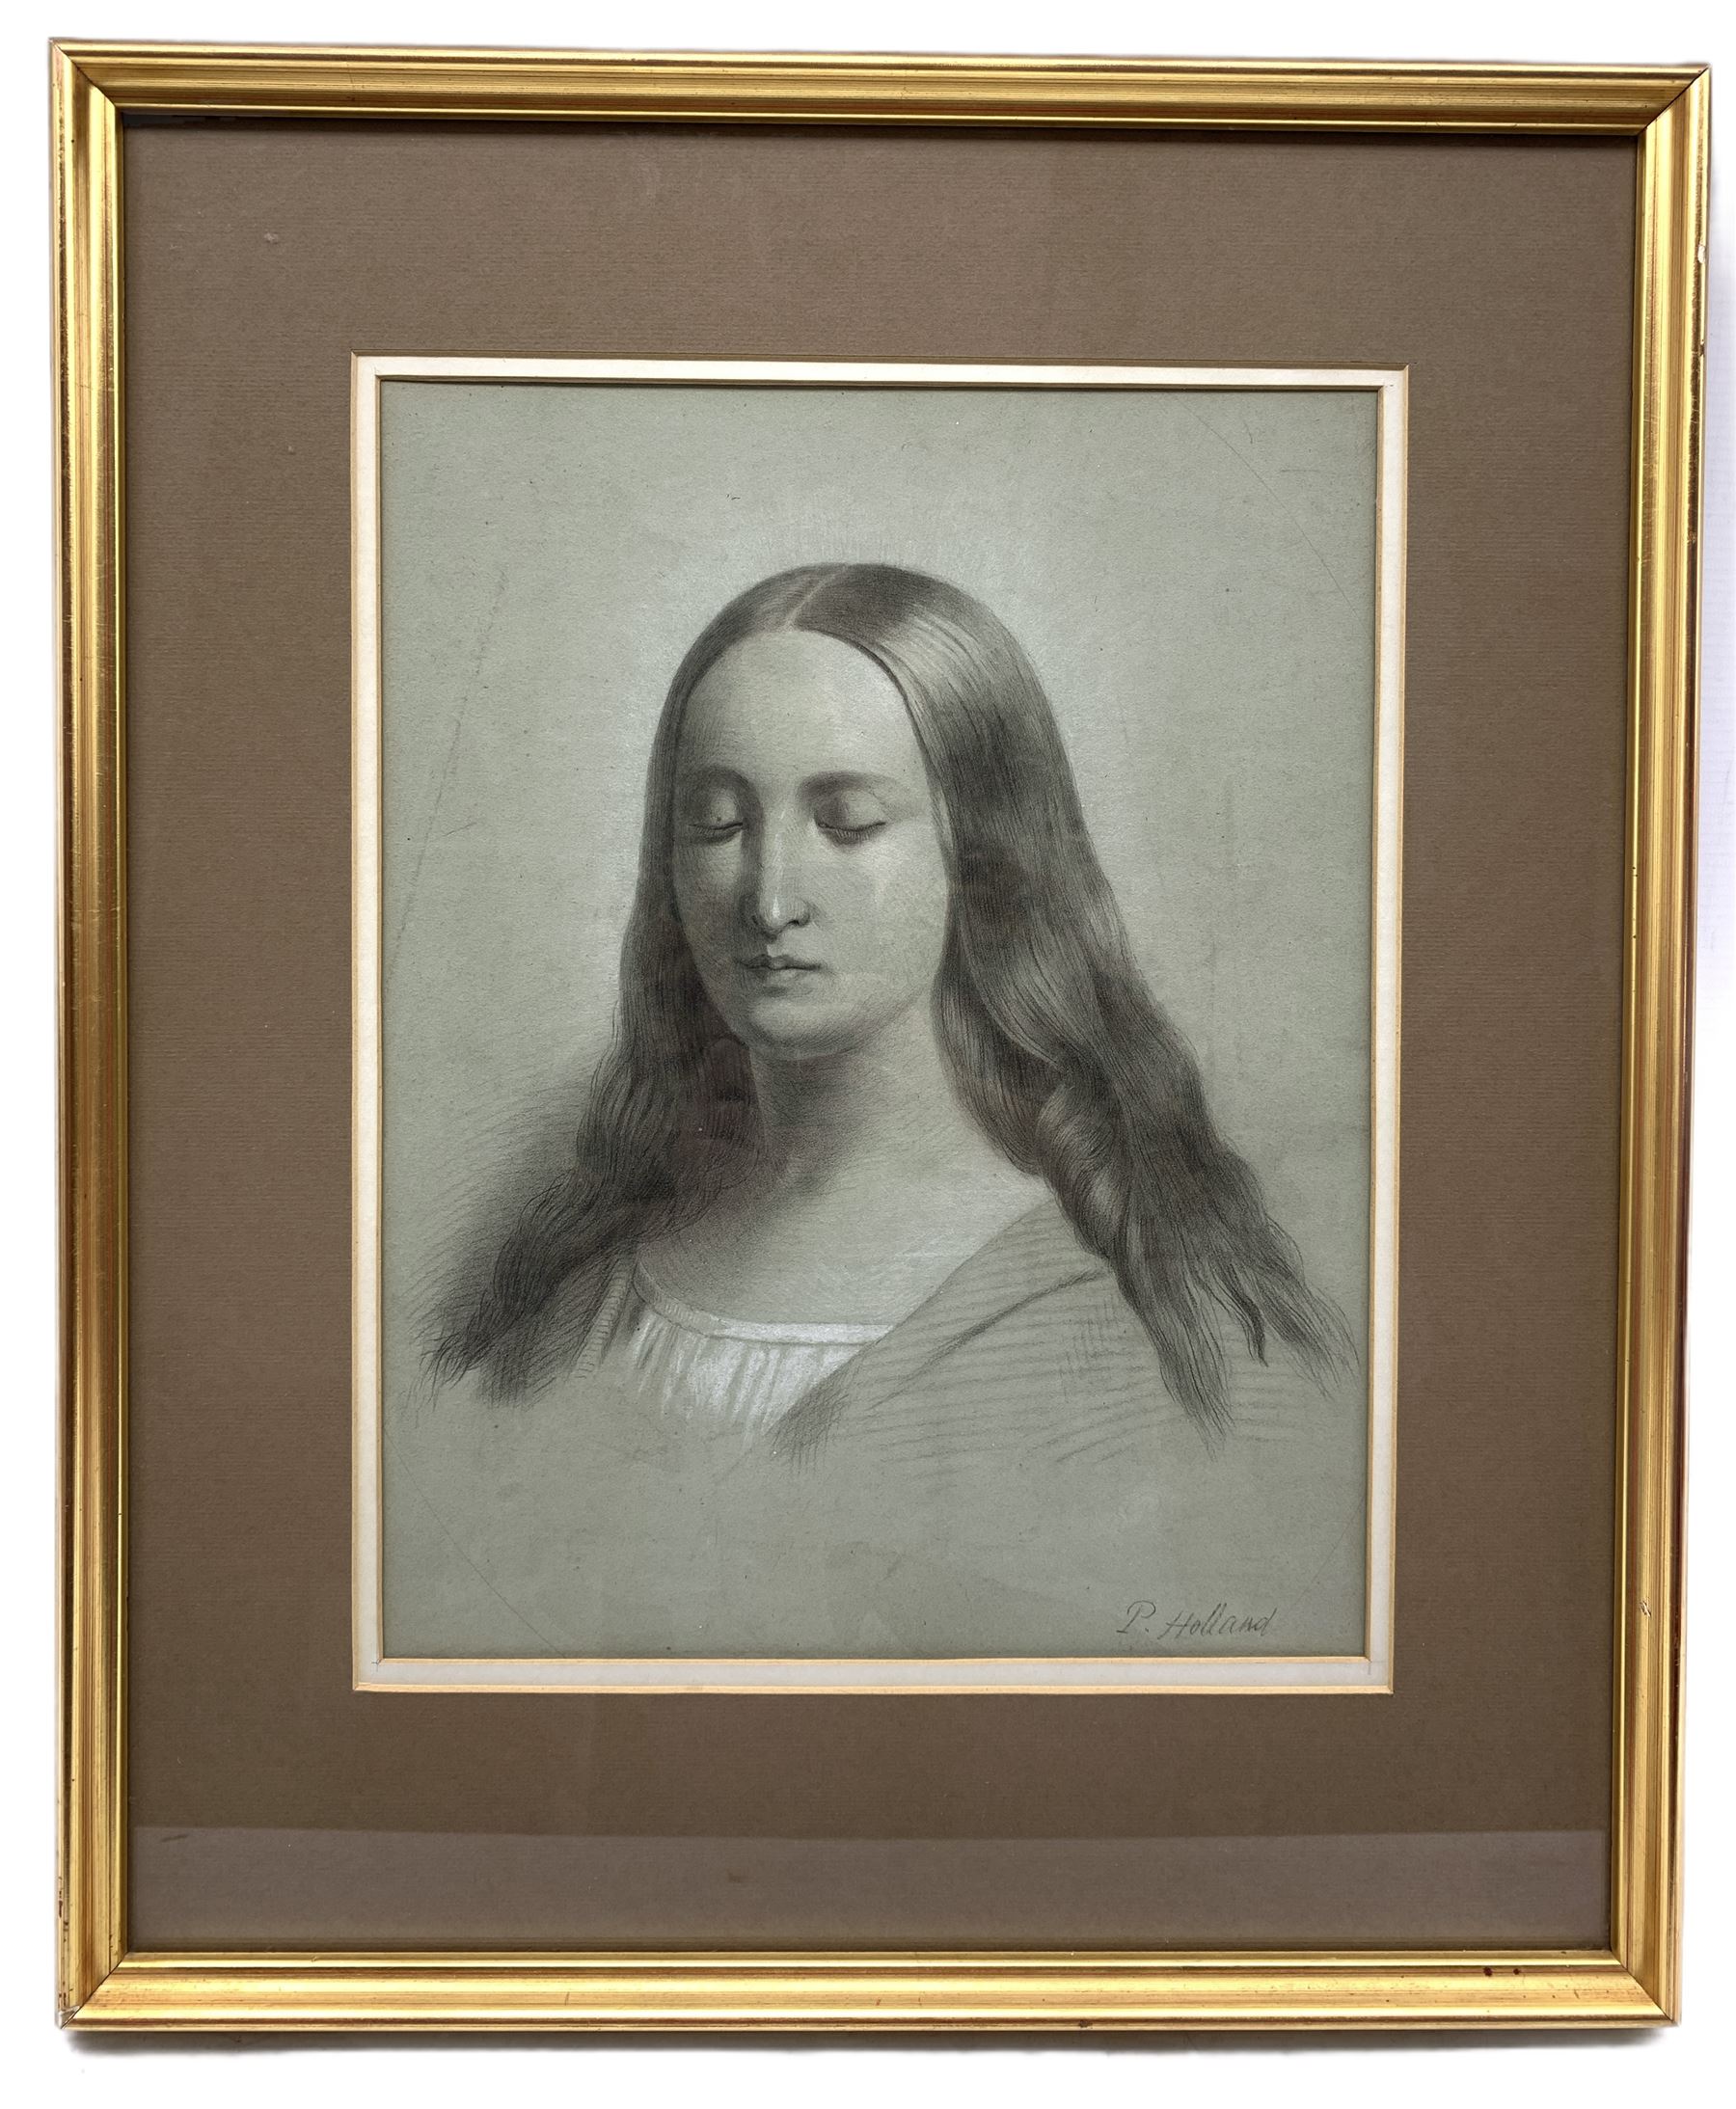 P Holland (Italian School 19th/20th century): Renaissance Style Head and Shoulders Portrait of Lady - Image 2 of 2